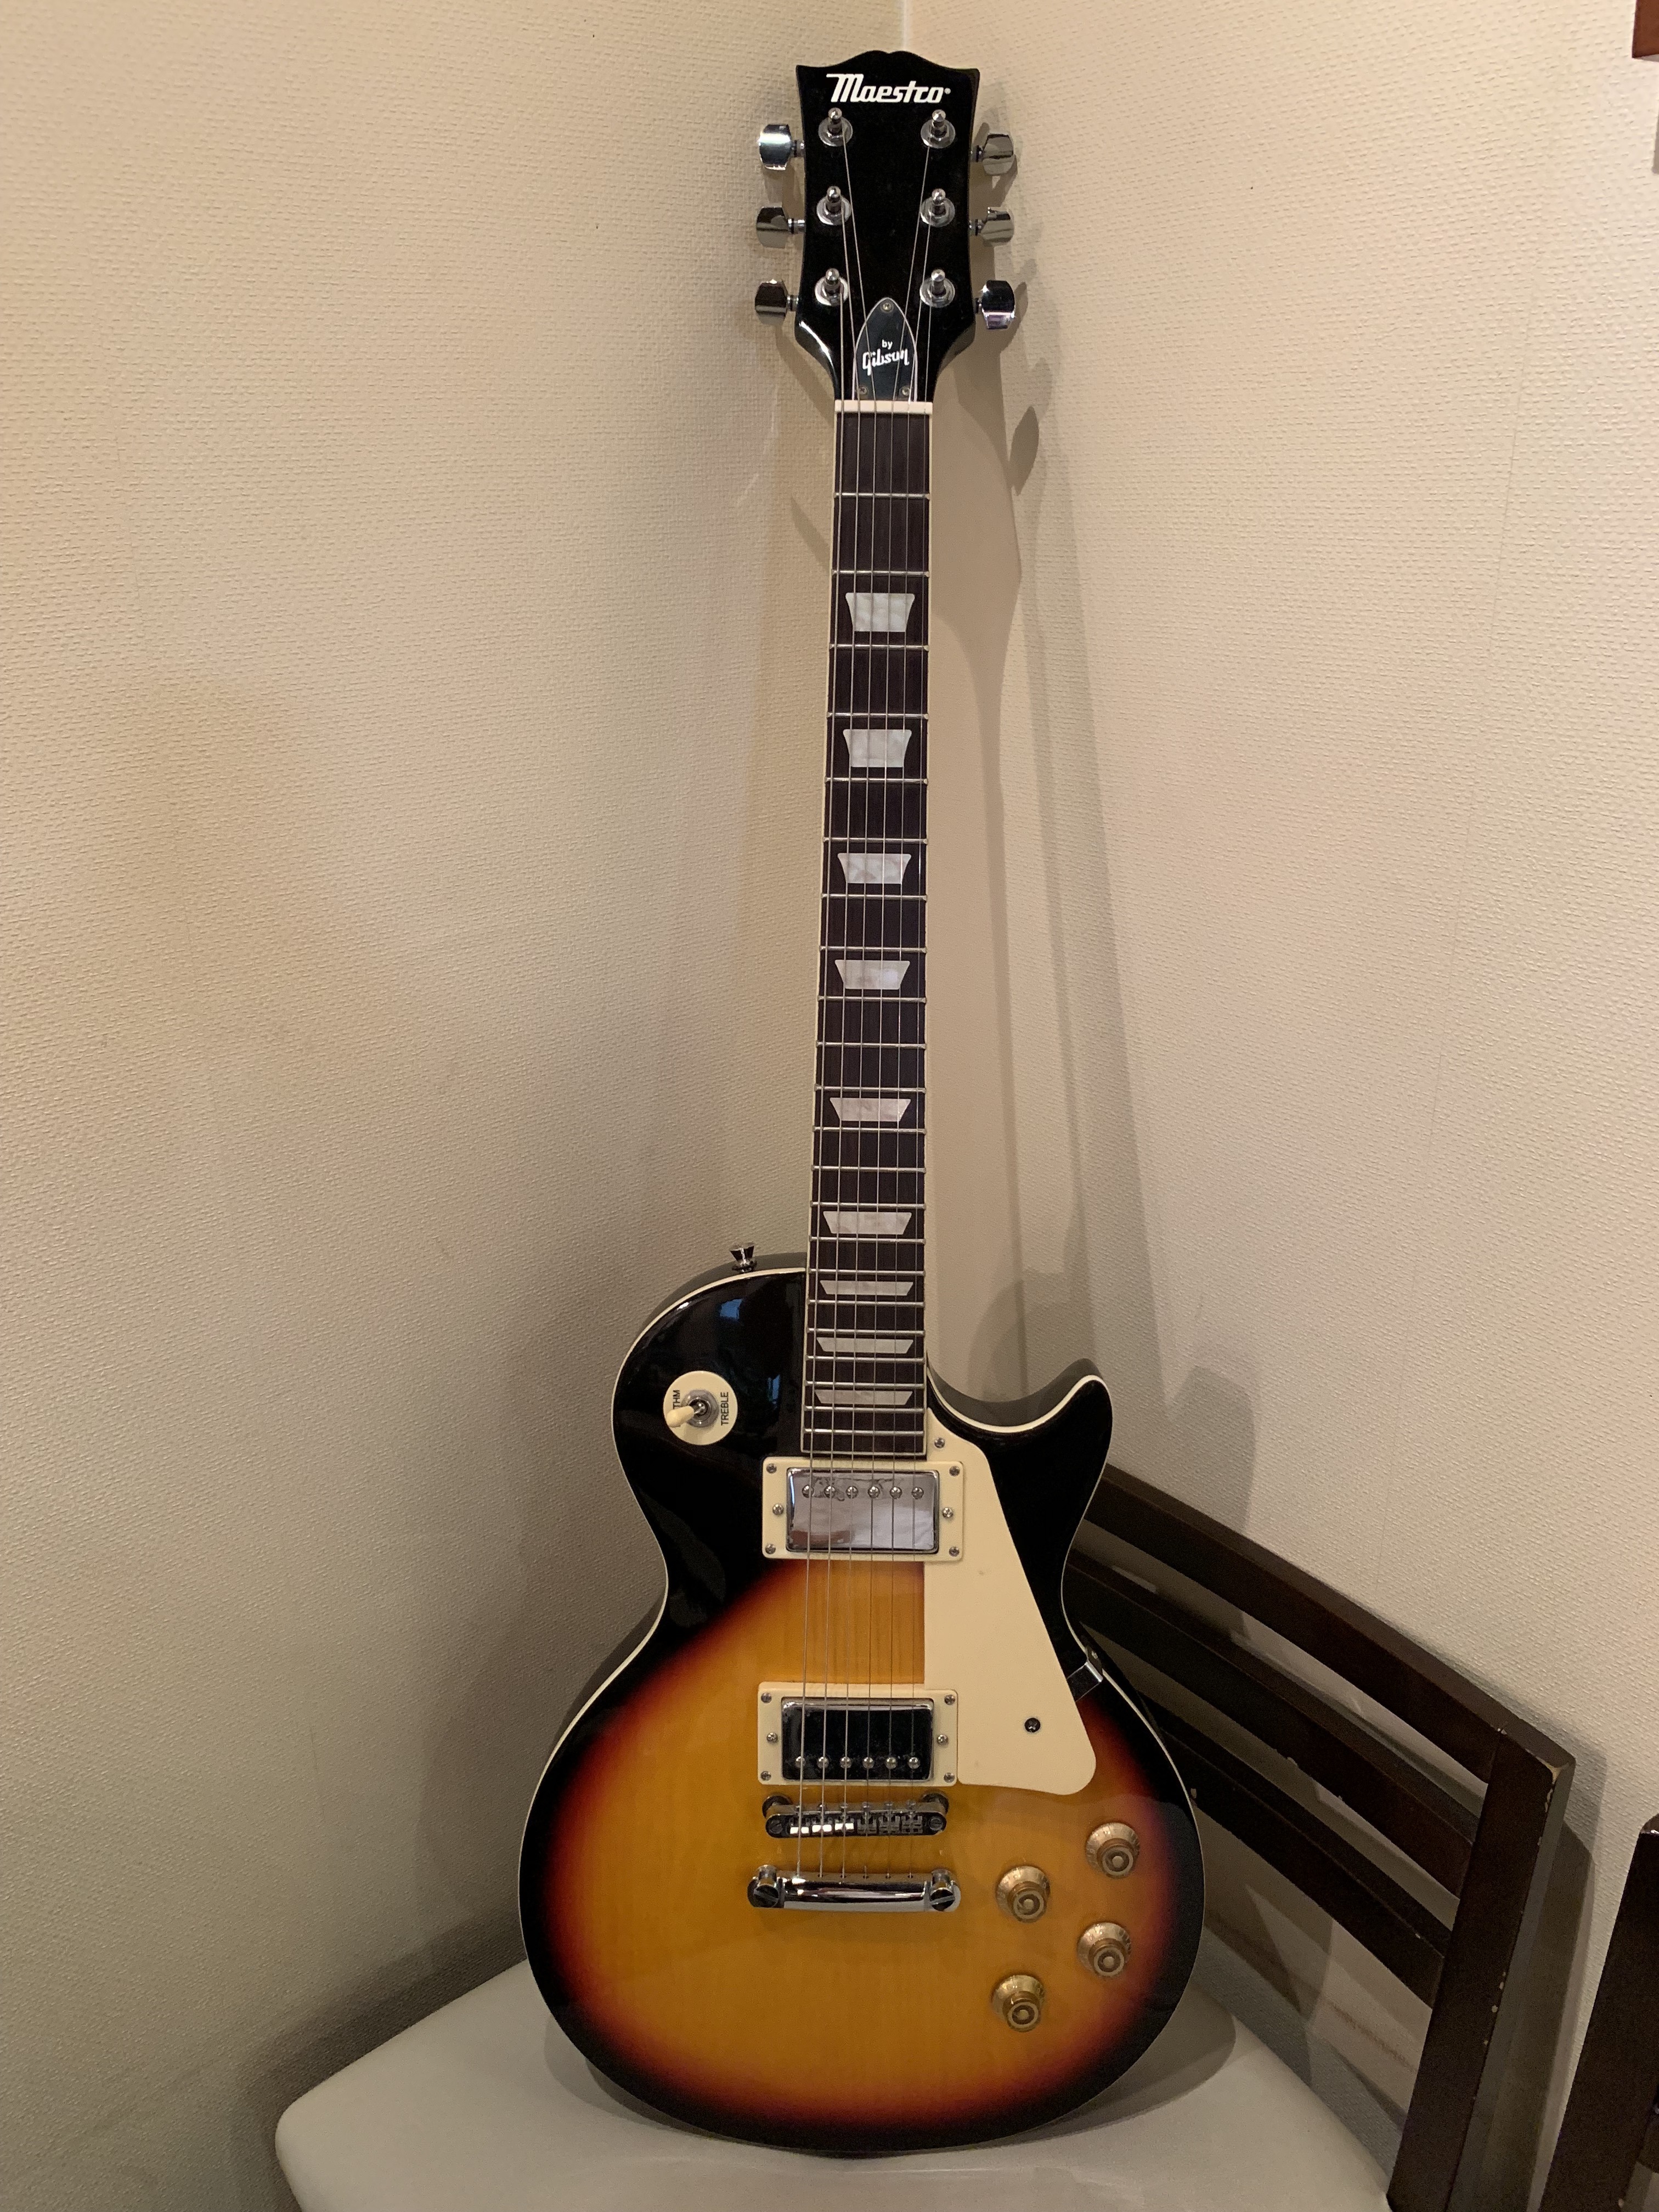 Maestro by Gibson: 33rpm